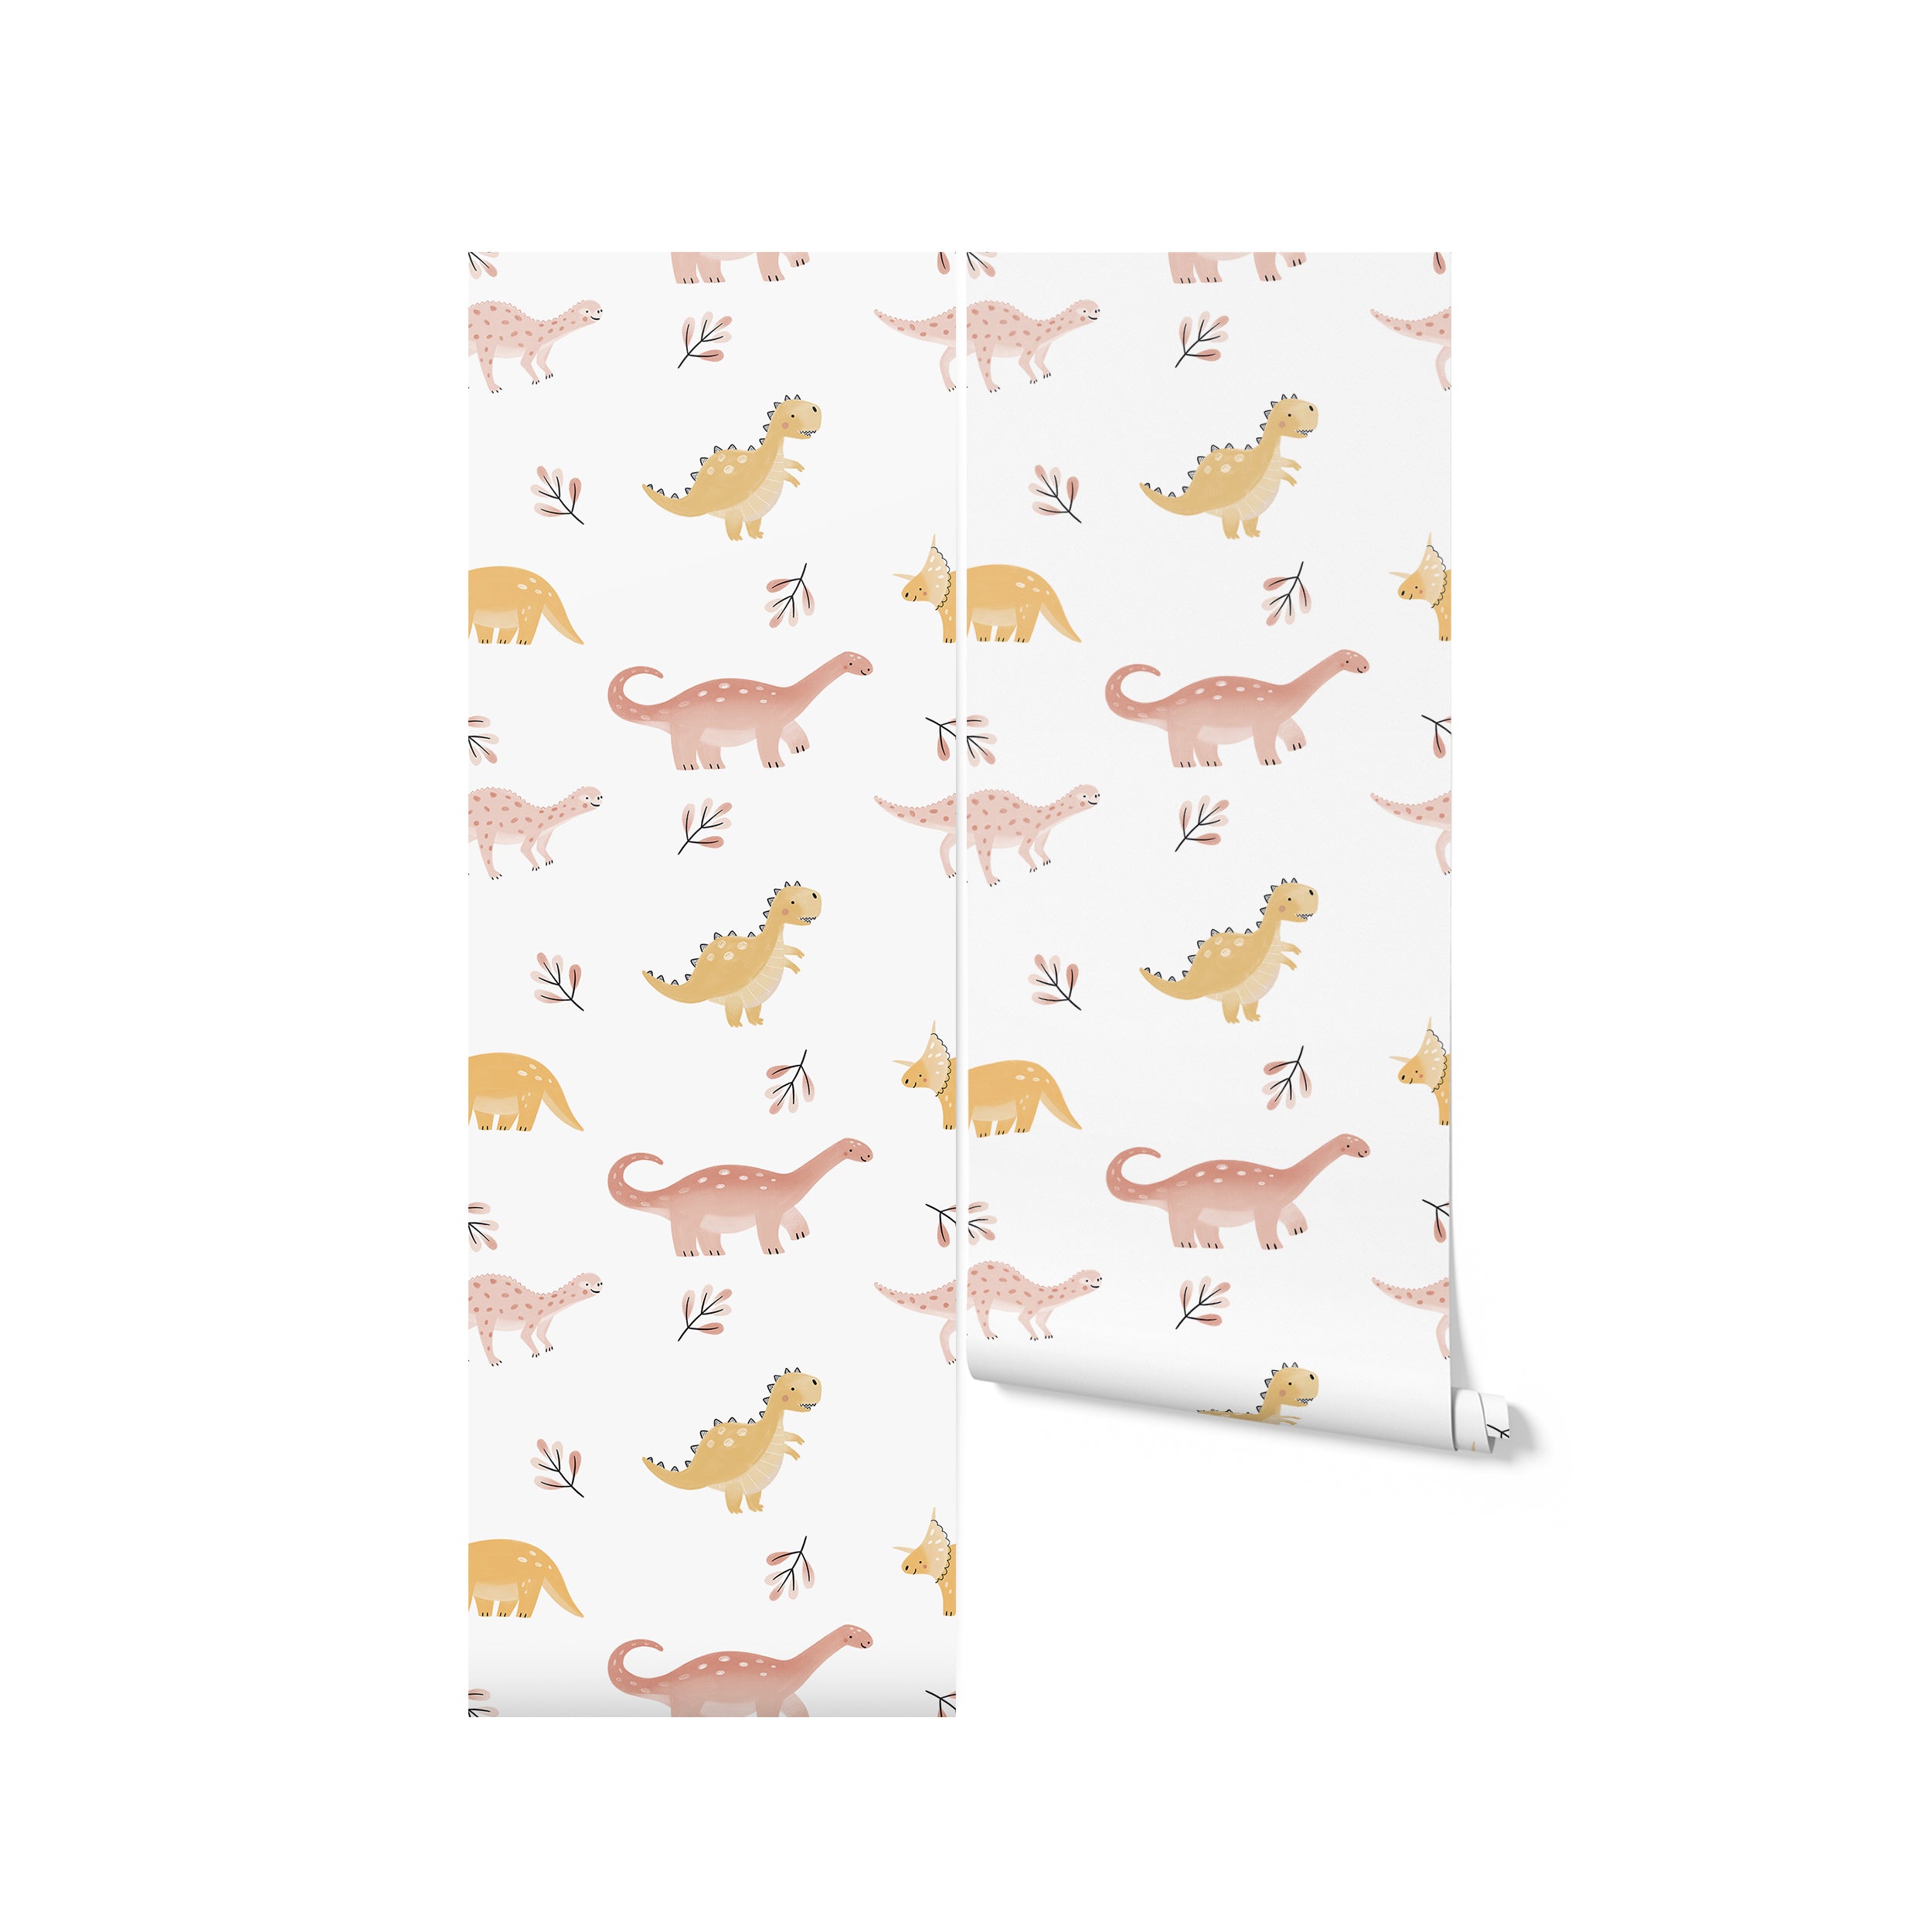 A roll of "Dino Days Wallpaper III" displayed, showing detailed illustrations of friendly dinosaurs and scattered foliage. The design's warm colors and playful scenes are perfect for nurturing a child's fascination with the prehistoric world in a cozy and comforting environment.